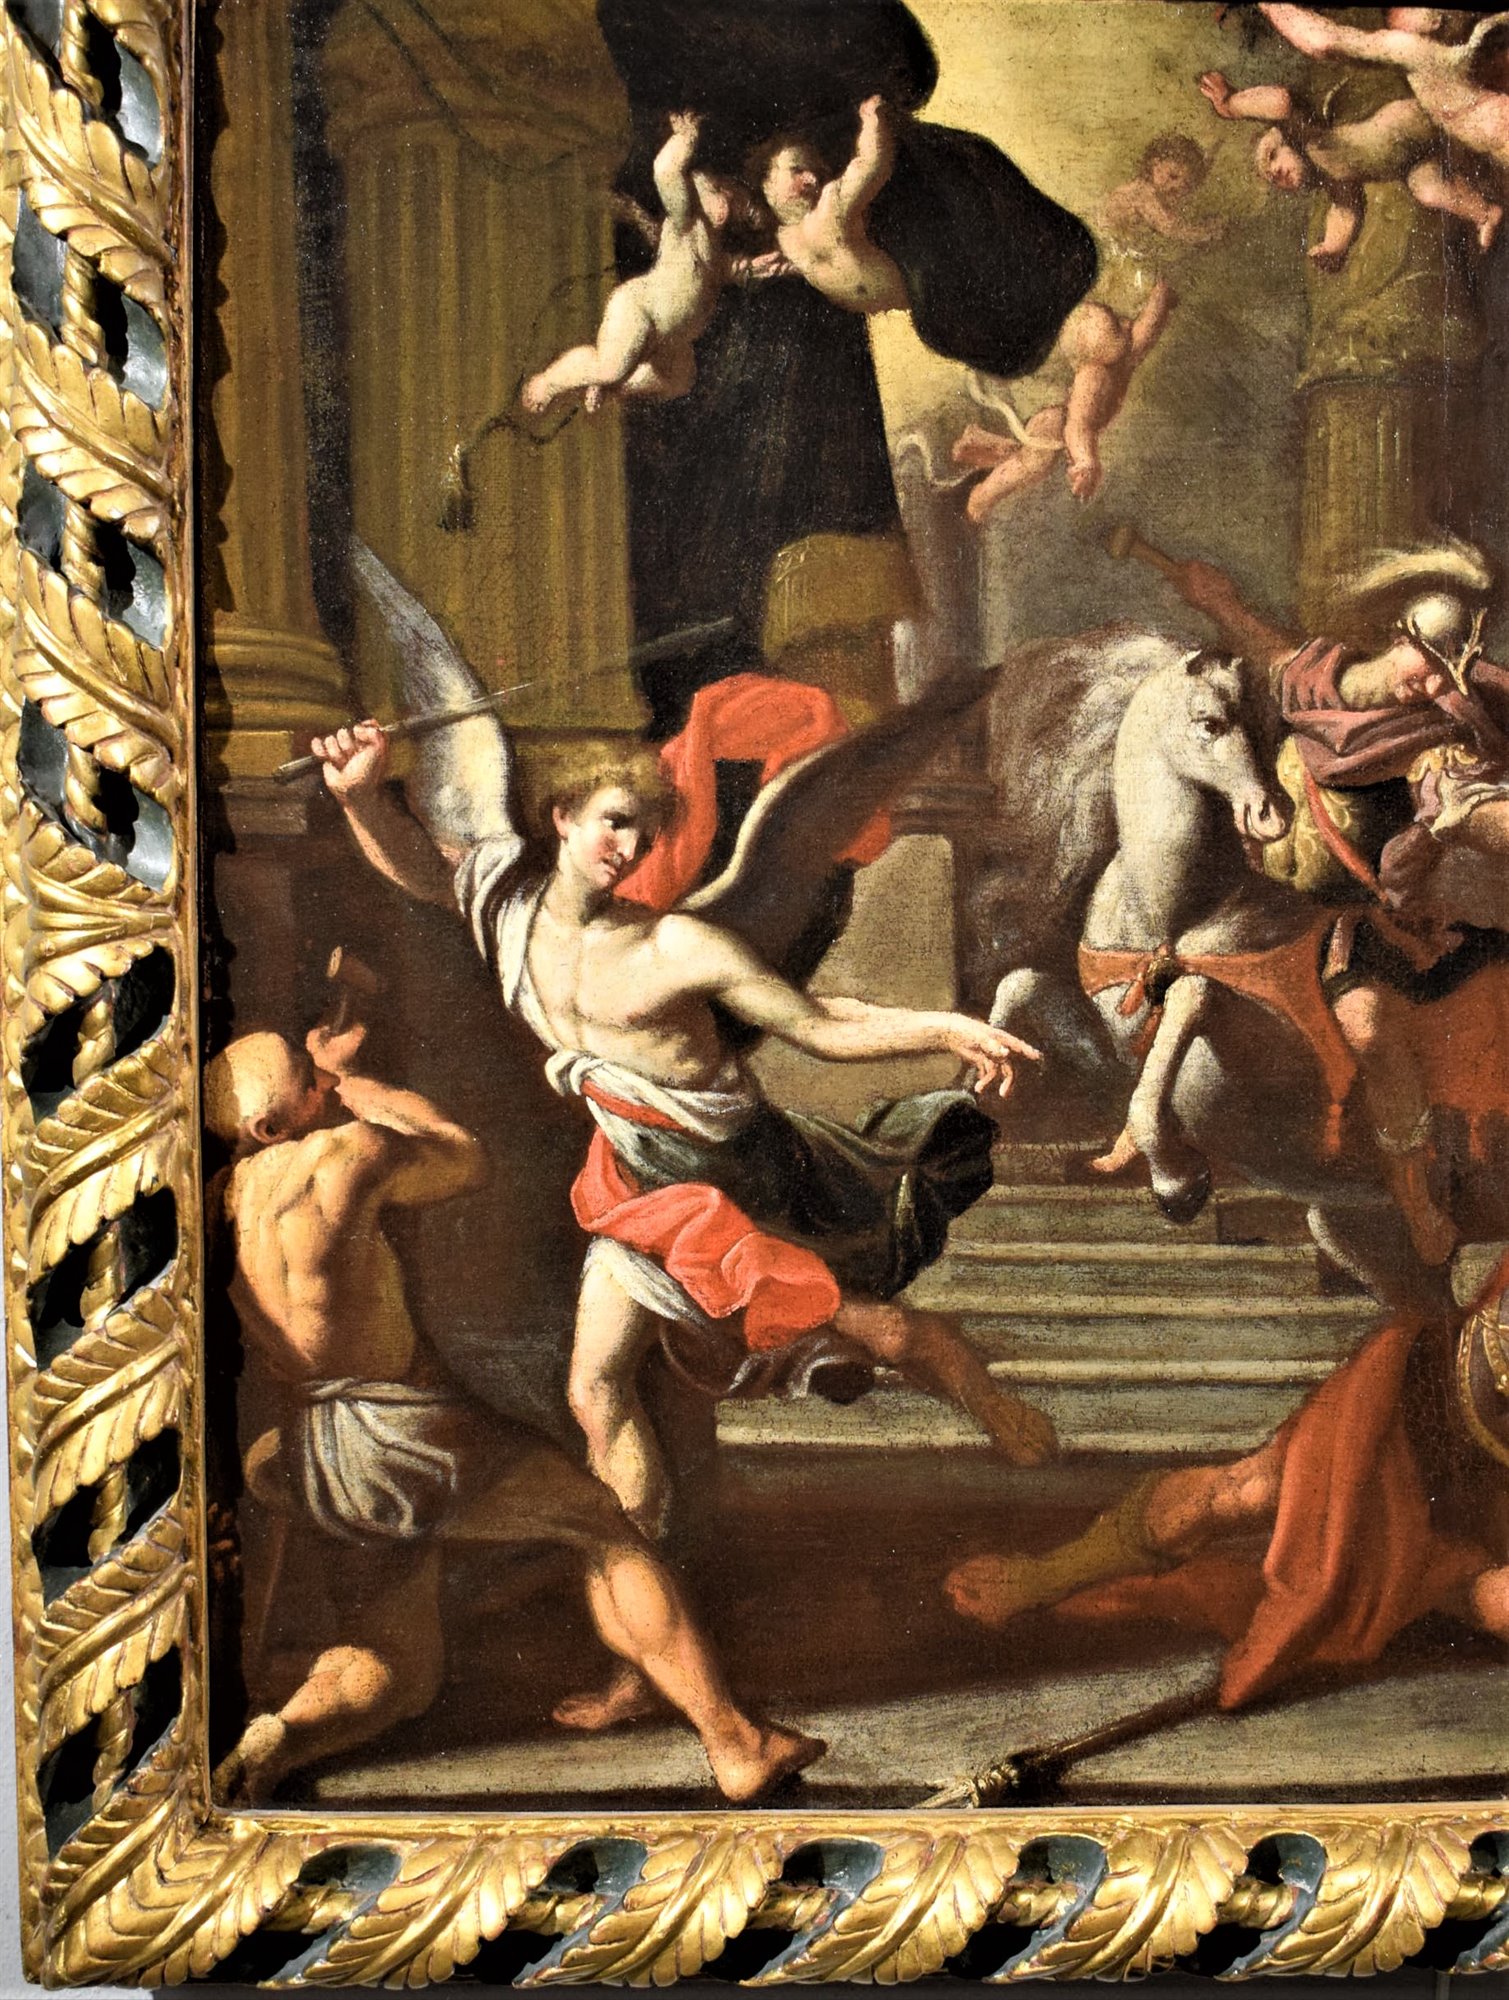 "Heliodorus expelled from the Temple"